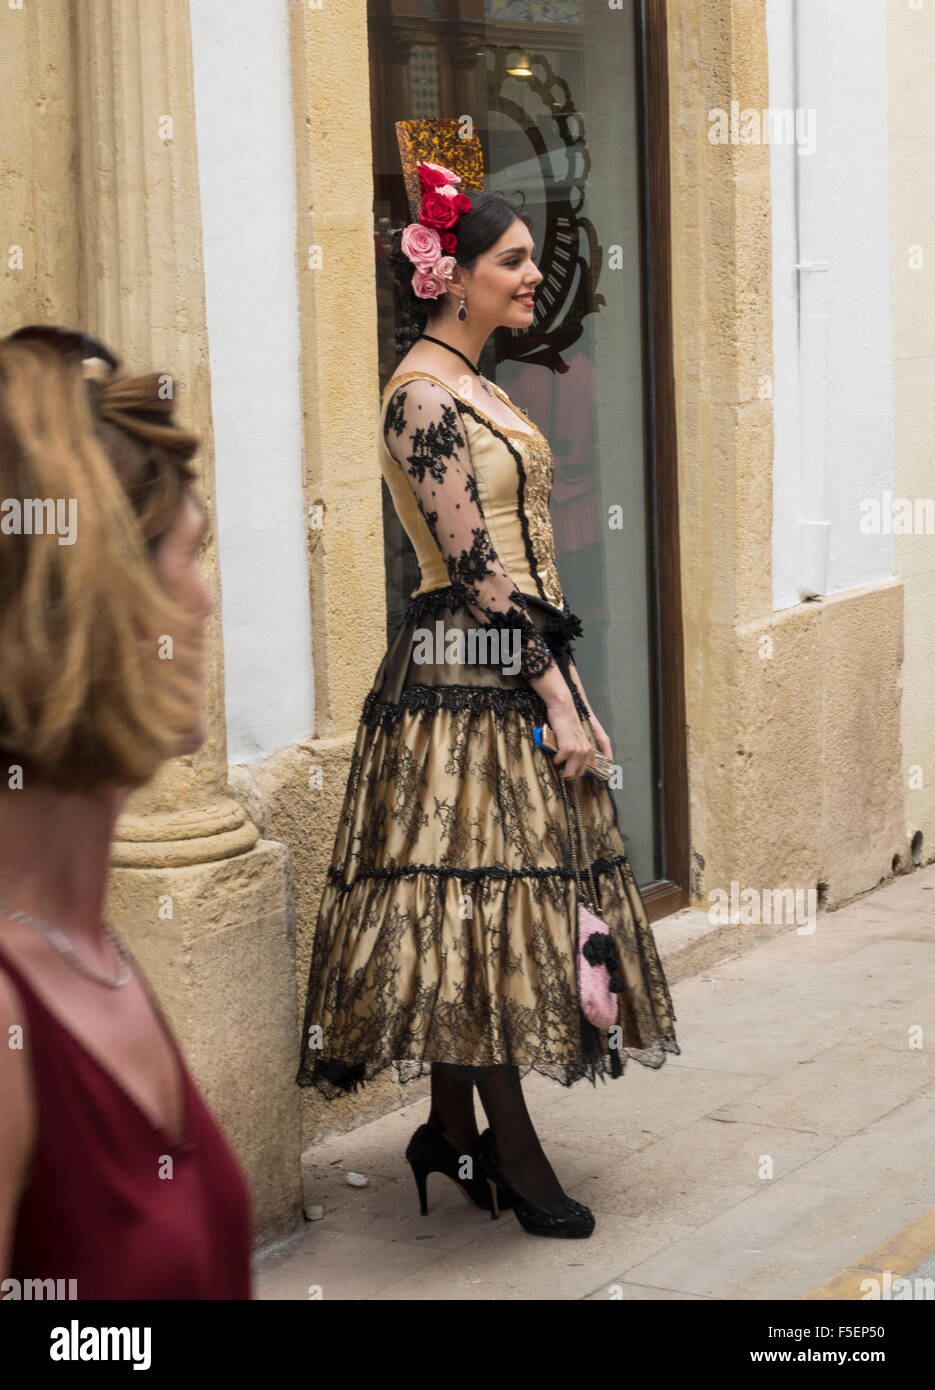 Tourist watches woman in traditional Andalucian dress in Ronda, Spain Stock Photo